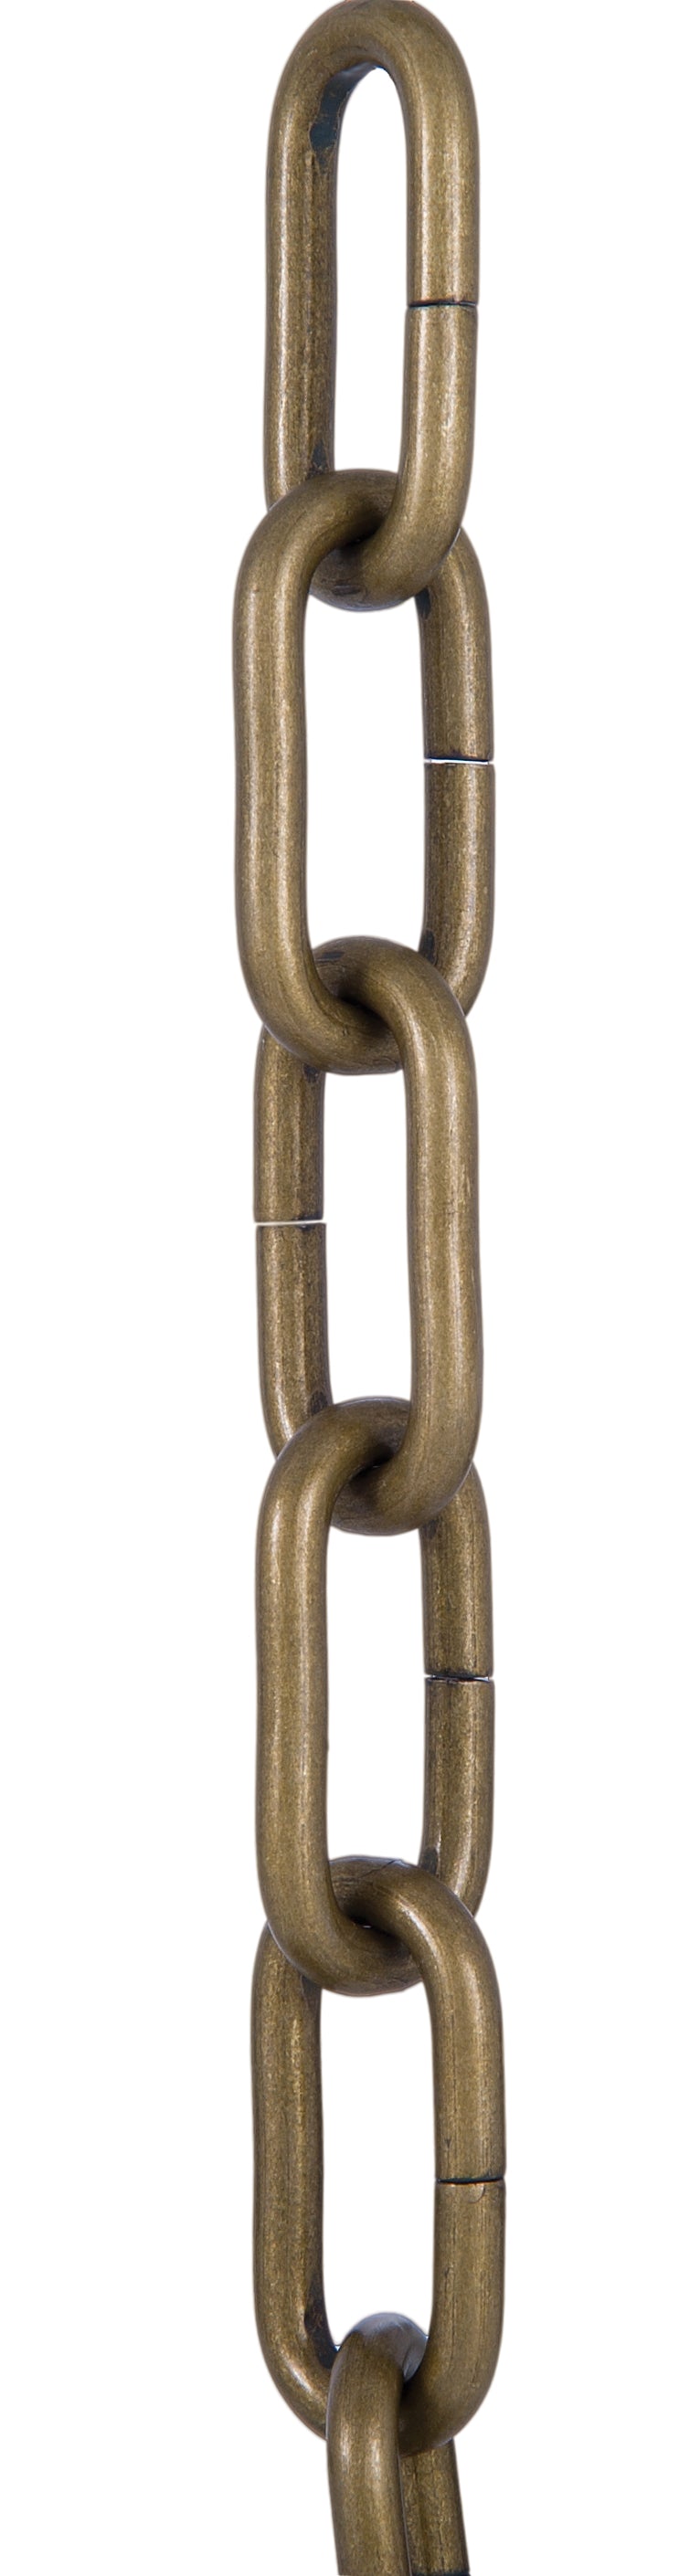 Antique Brass Finish, 0 Gauge Heavy Duty Steel Chain for Larger Fixtures